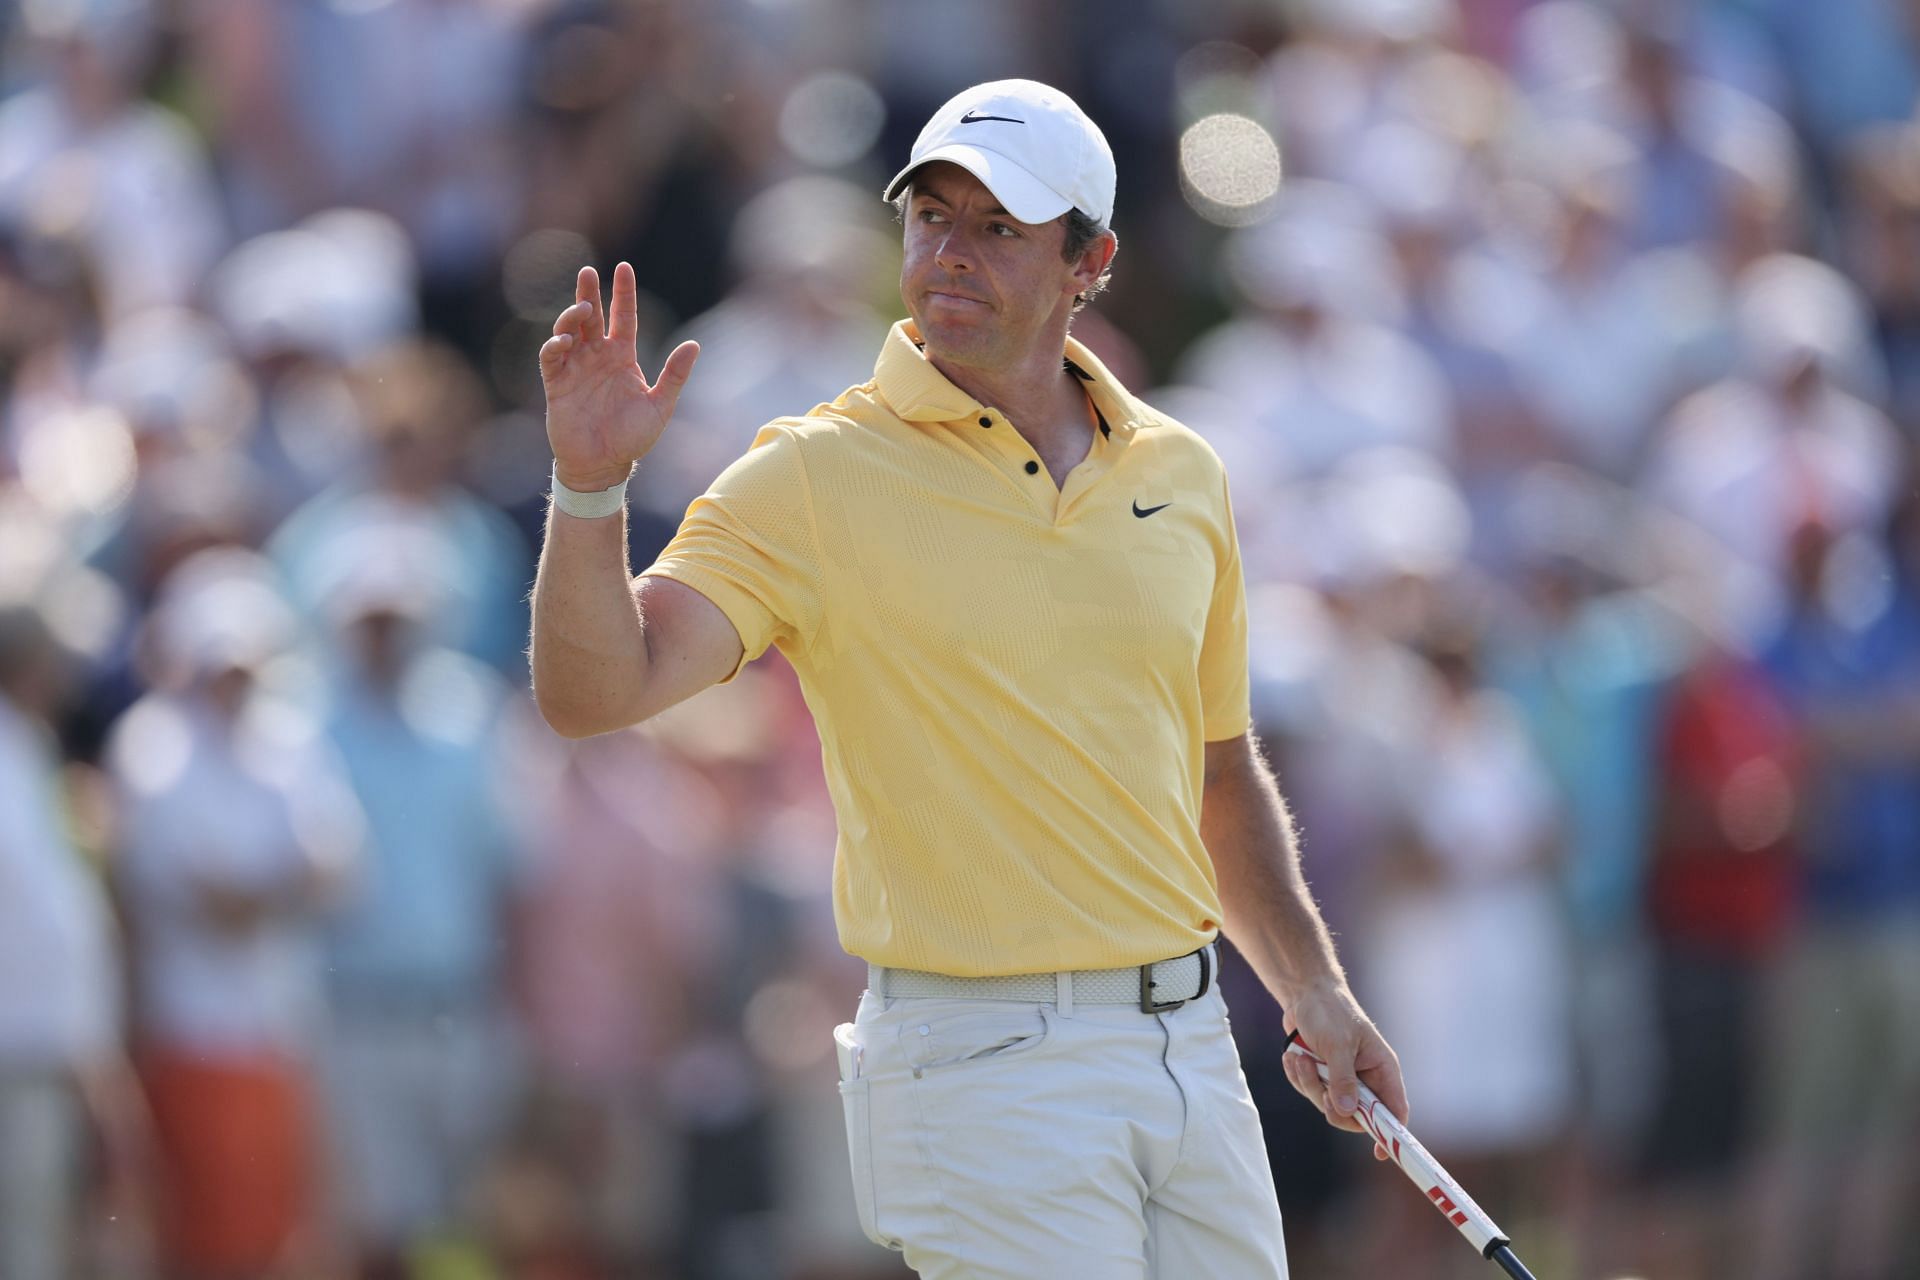 Rory McIlroy is not happy